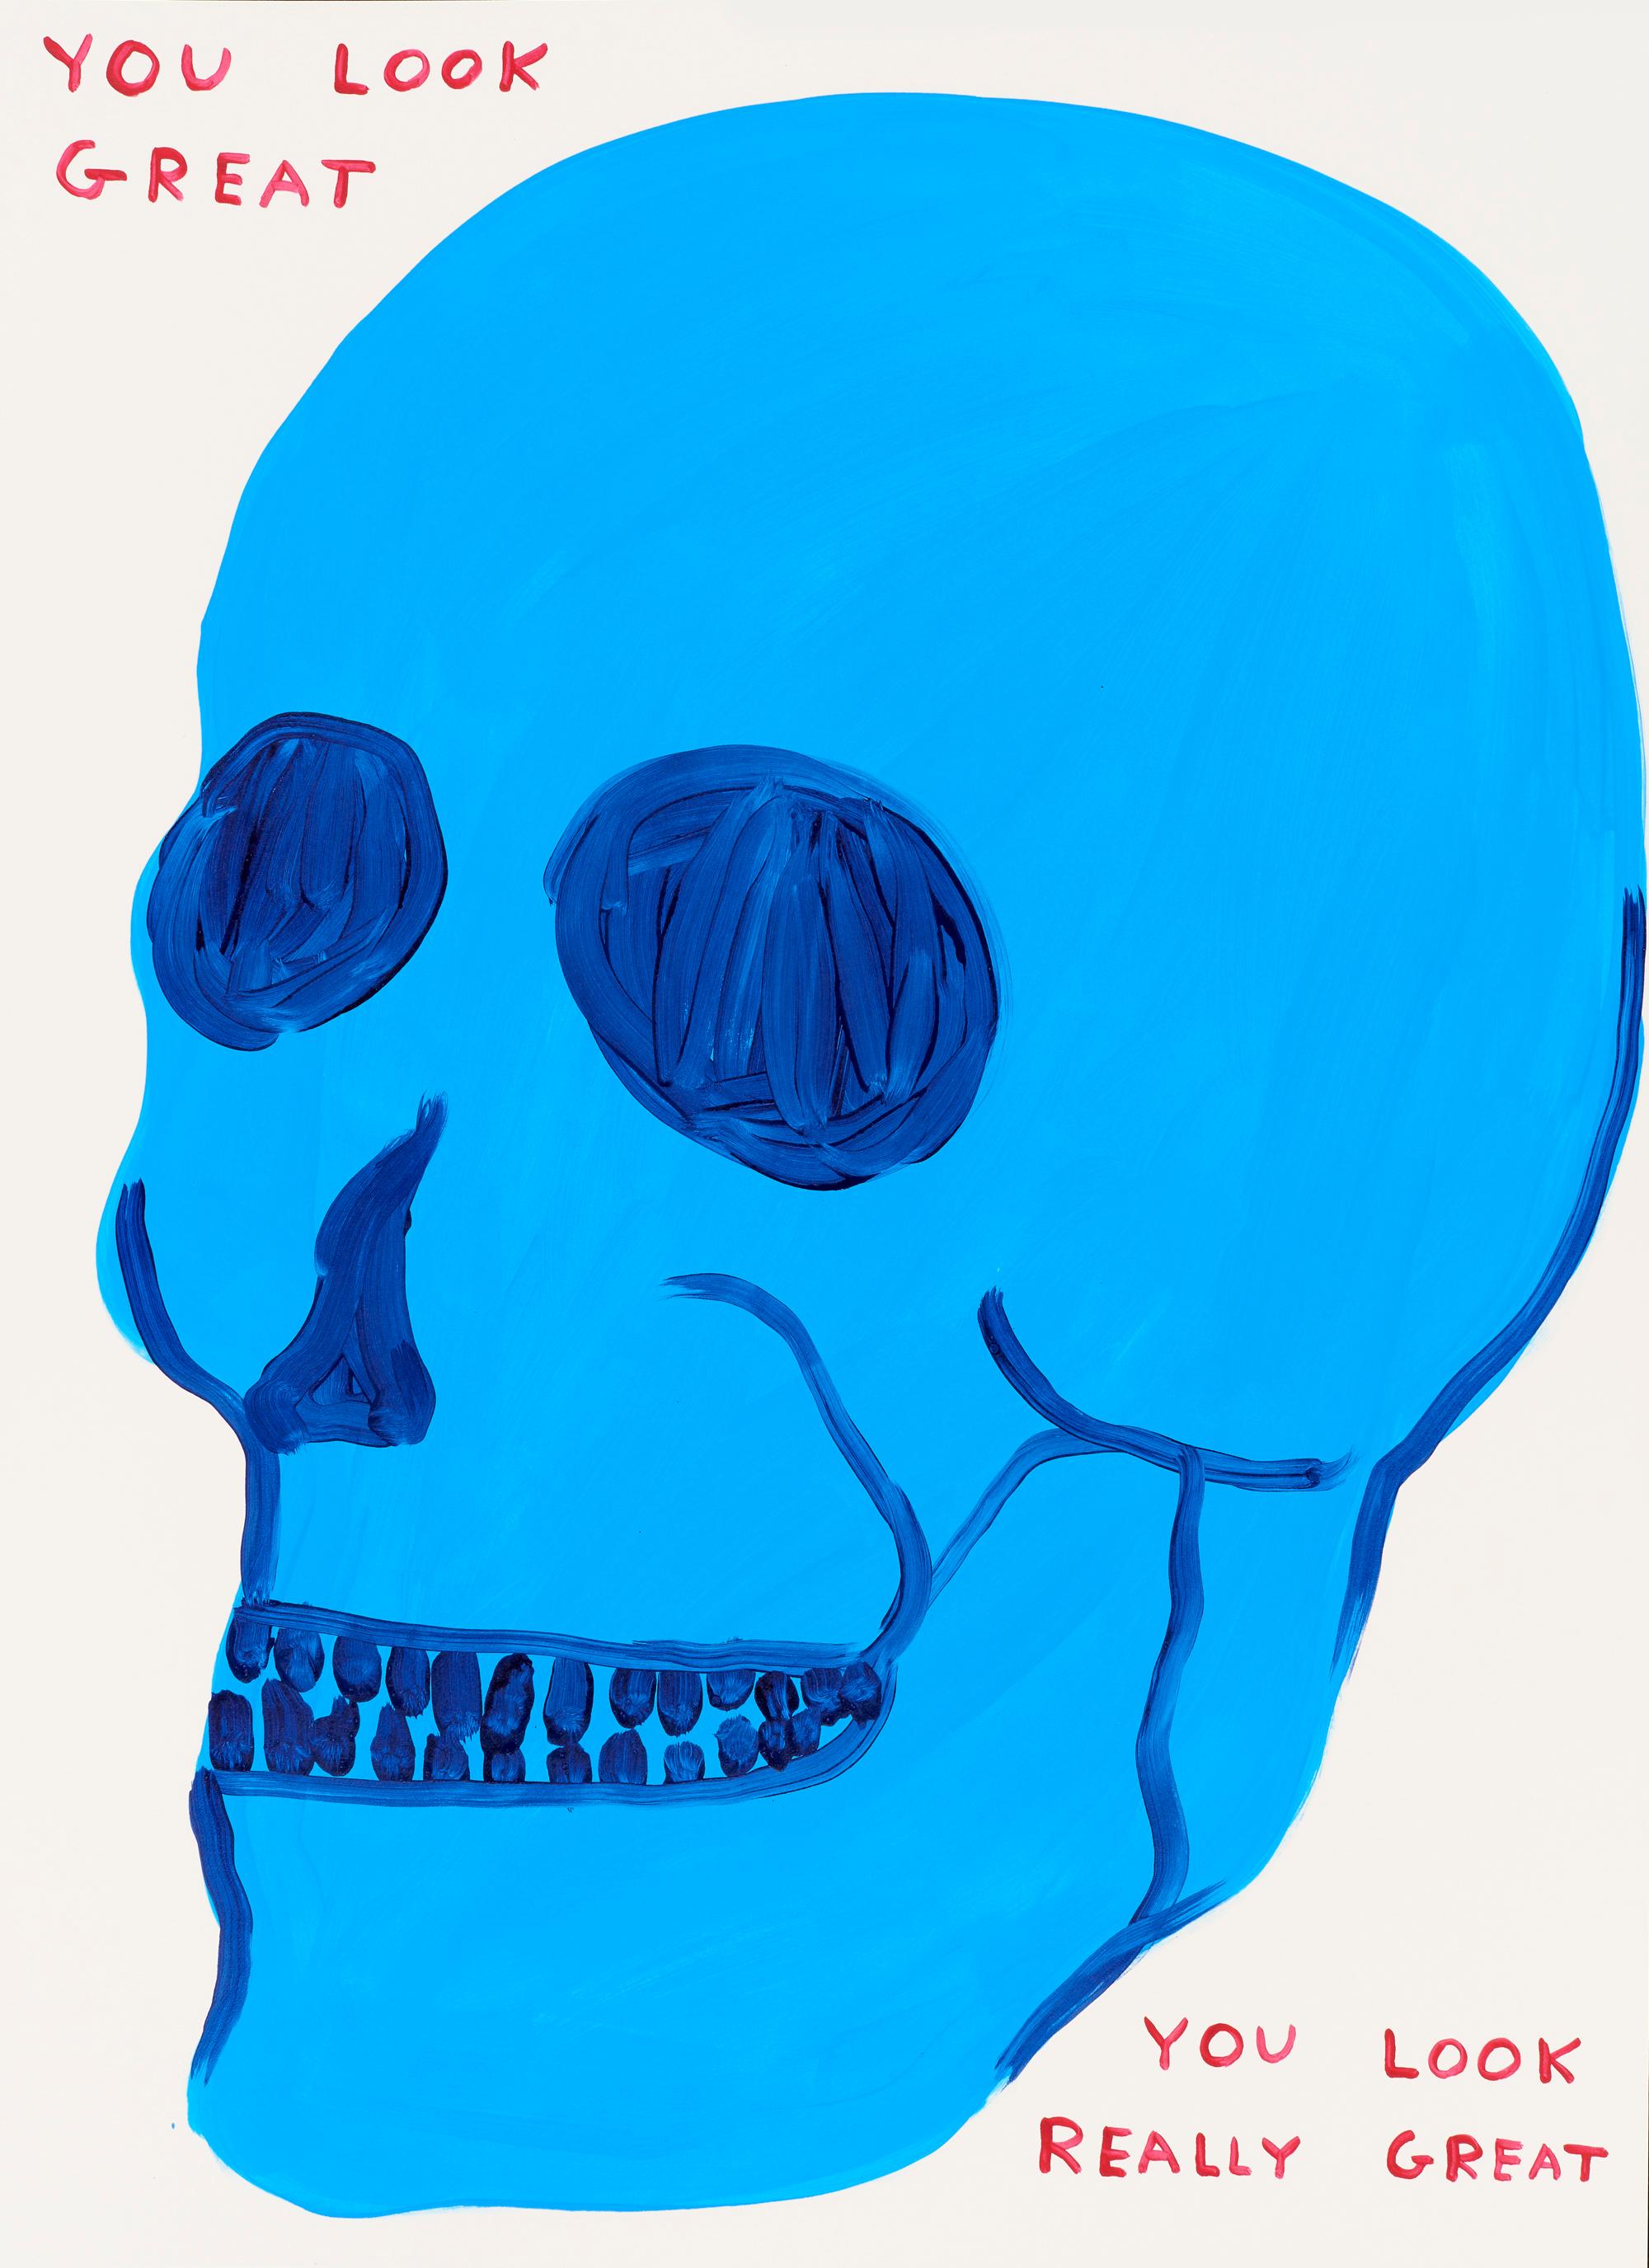 David Shrigley Figurative Painting - Untitled (You Look Great)